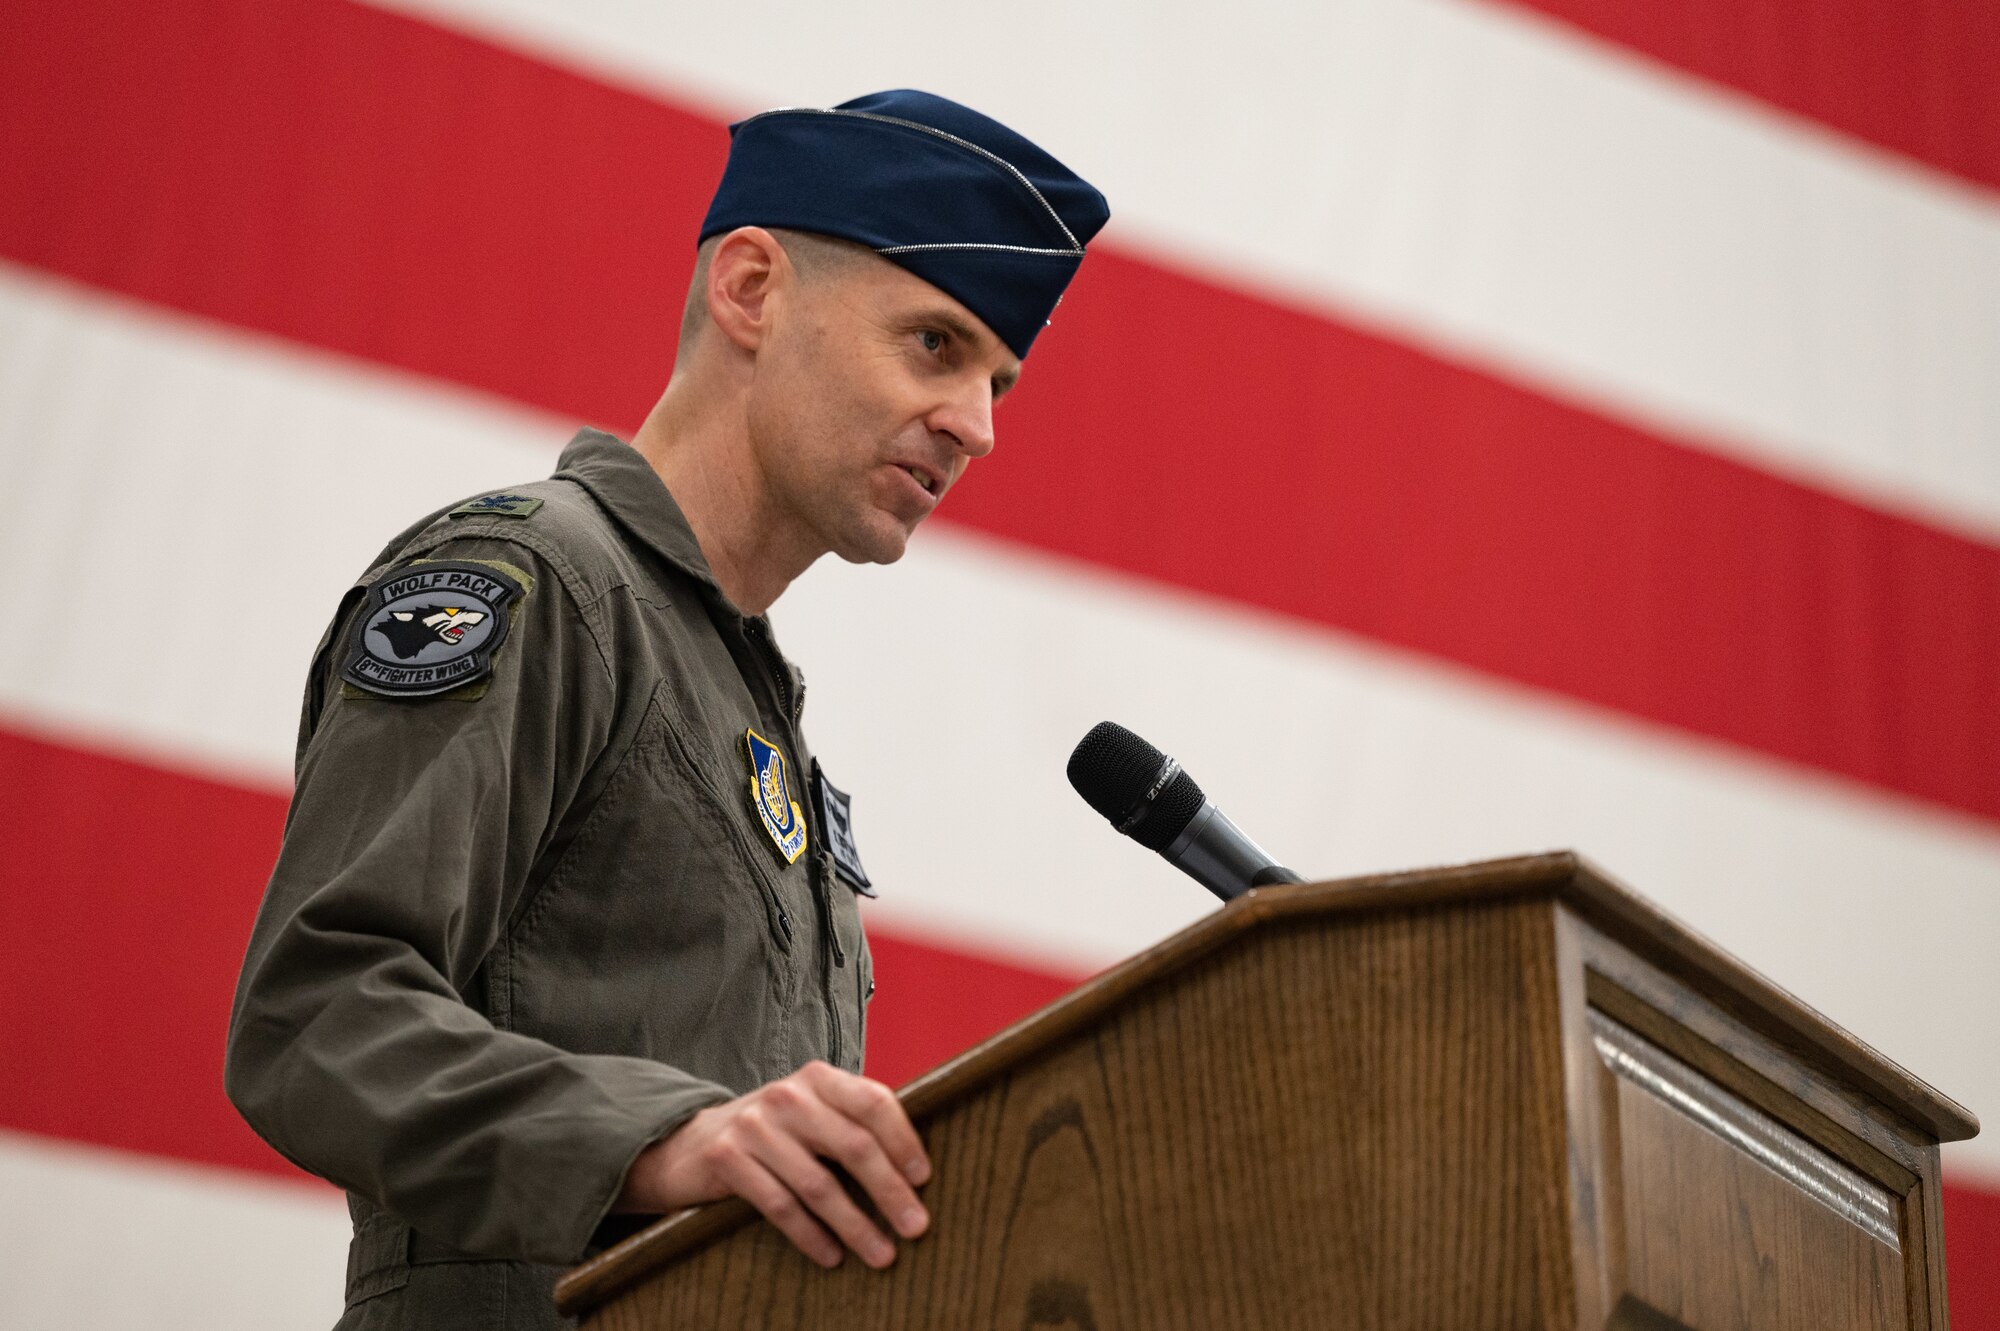 Col. Timothy B. Murphy, 8th Fighter Wing commander, delivers remarks during the 8th Operations Group change of command ceremony at Kunsan Air Base, Republic of Korea, June 2, 2023. The 8th OG is responsible for conventional air-to-ground and air-to-air missions in support of armistice and wartime taskings to defend the Republic of Korea. (U.S. Air Force photo by Staff Sgt. Sadie Colbert)